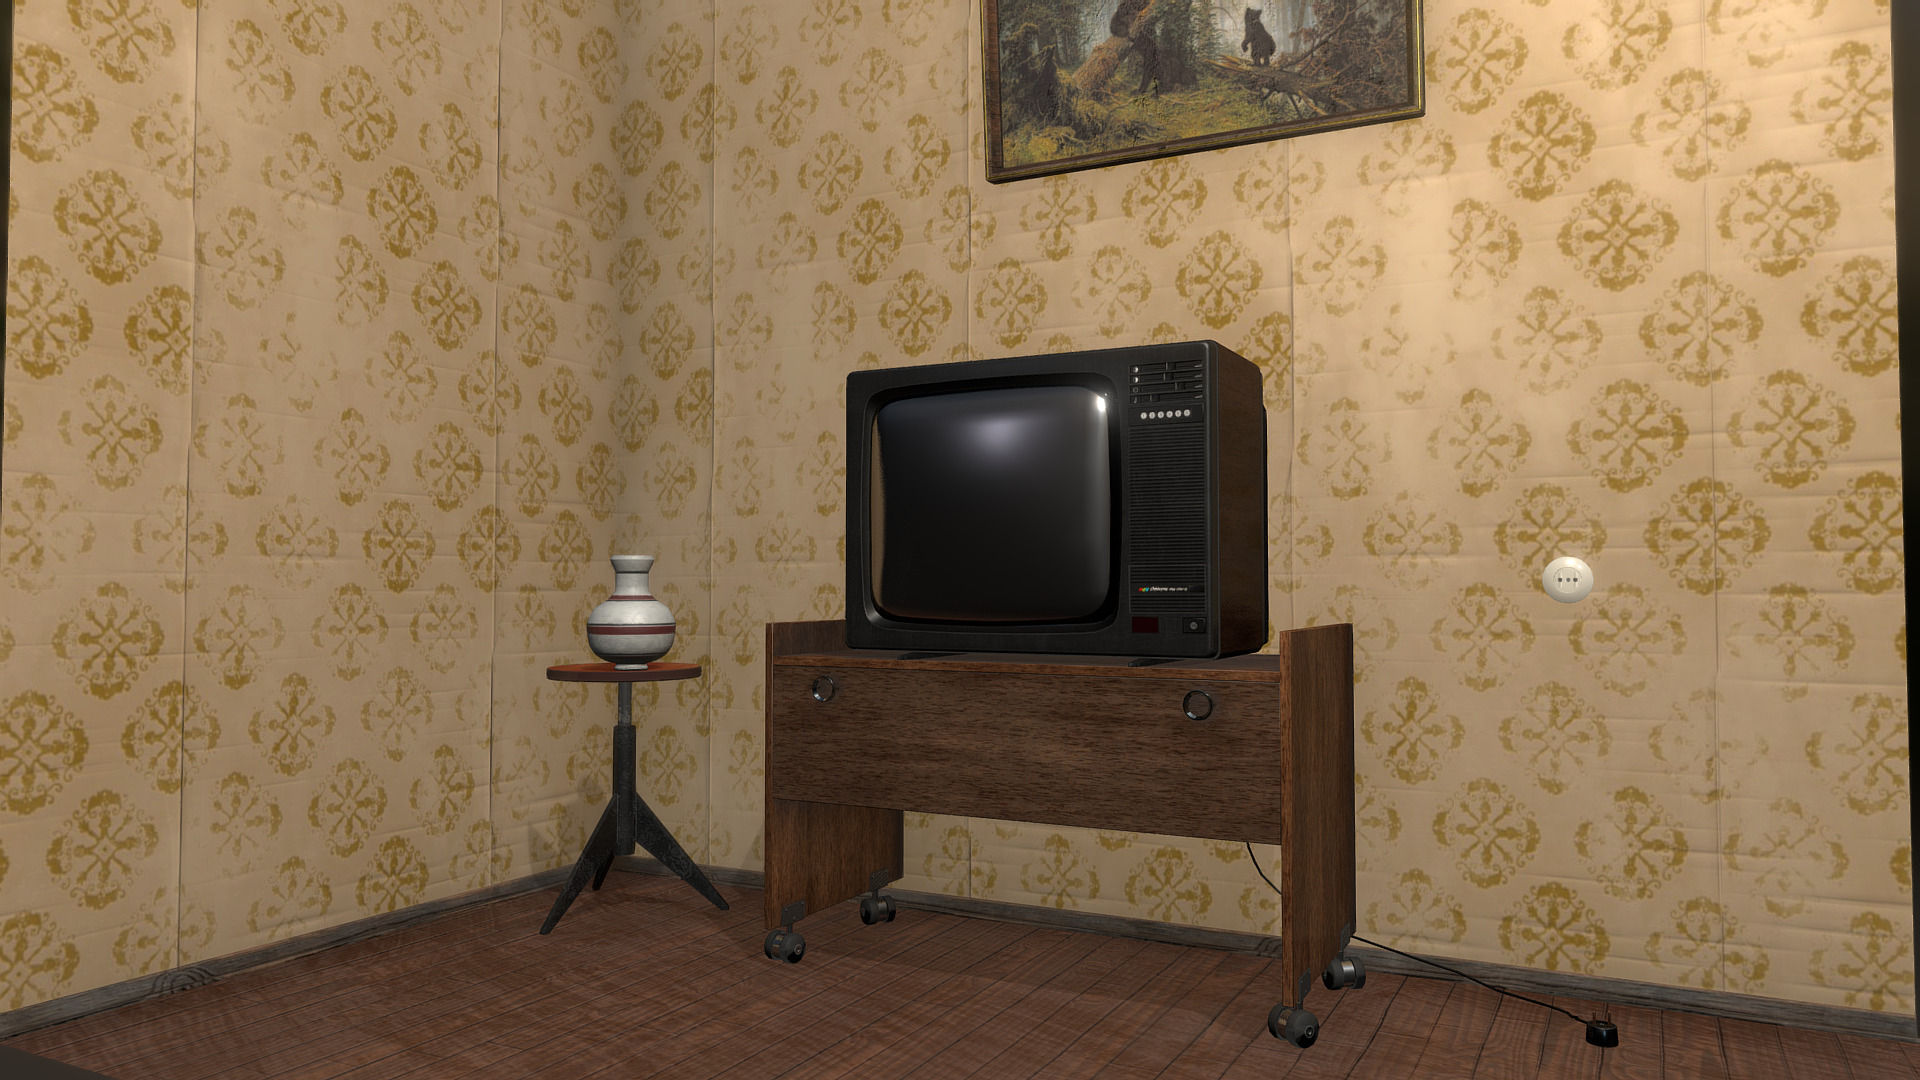 3D model Soviet style living room - This is a 3D model of the Soviet style living room. The 3D model is about a tv on a stand.